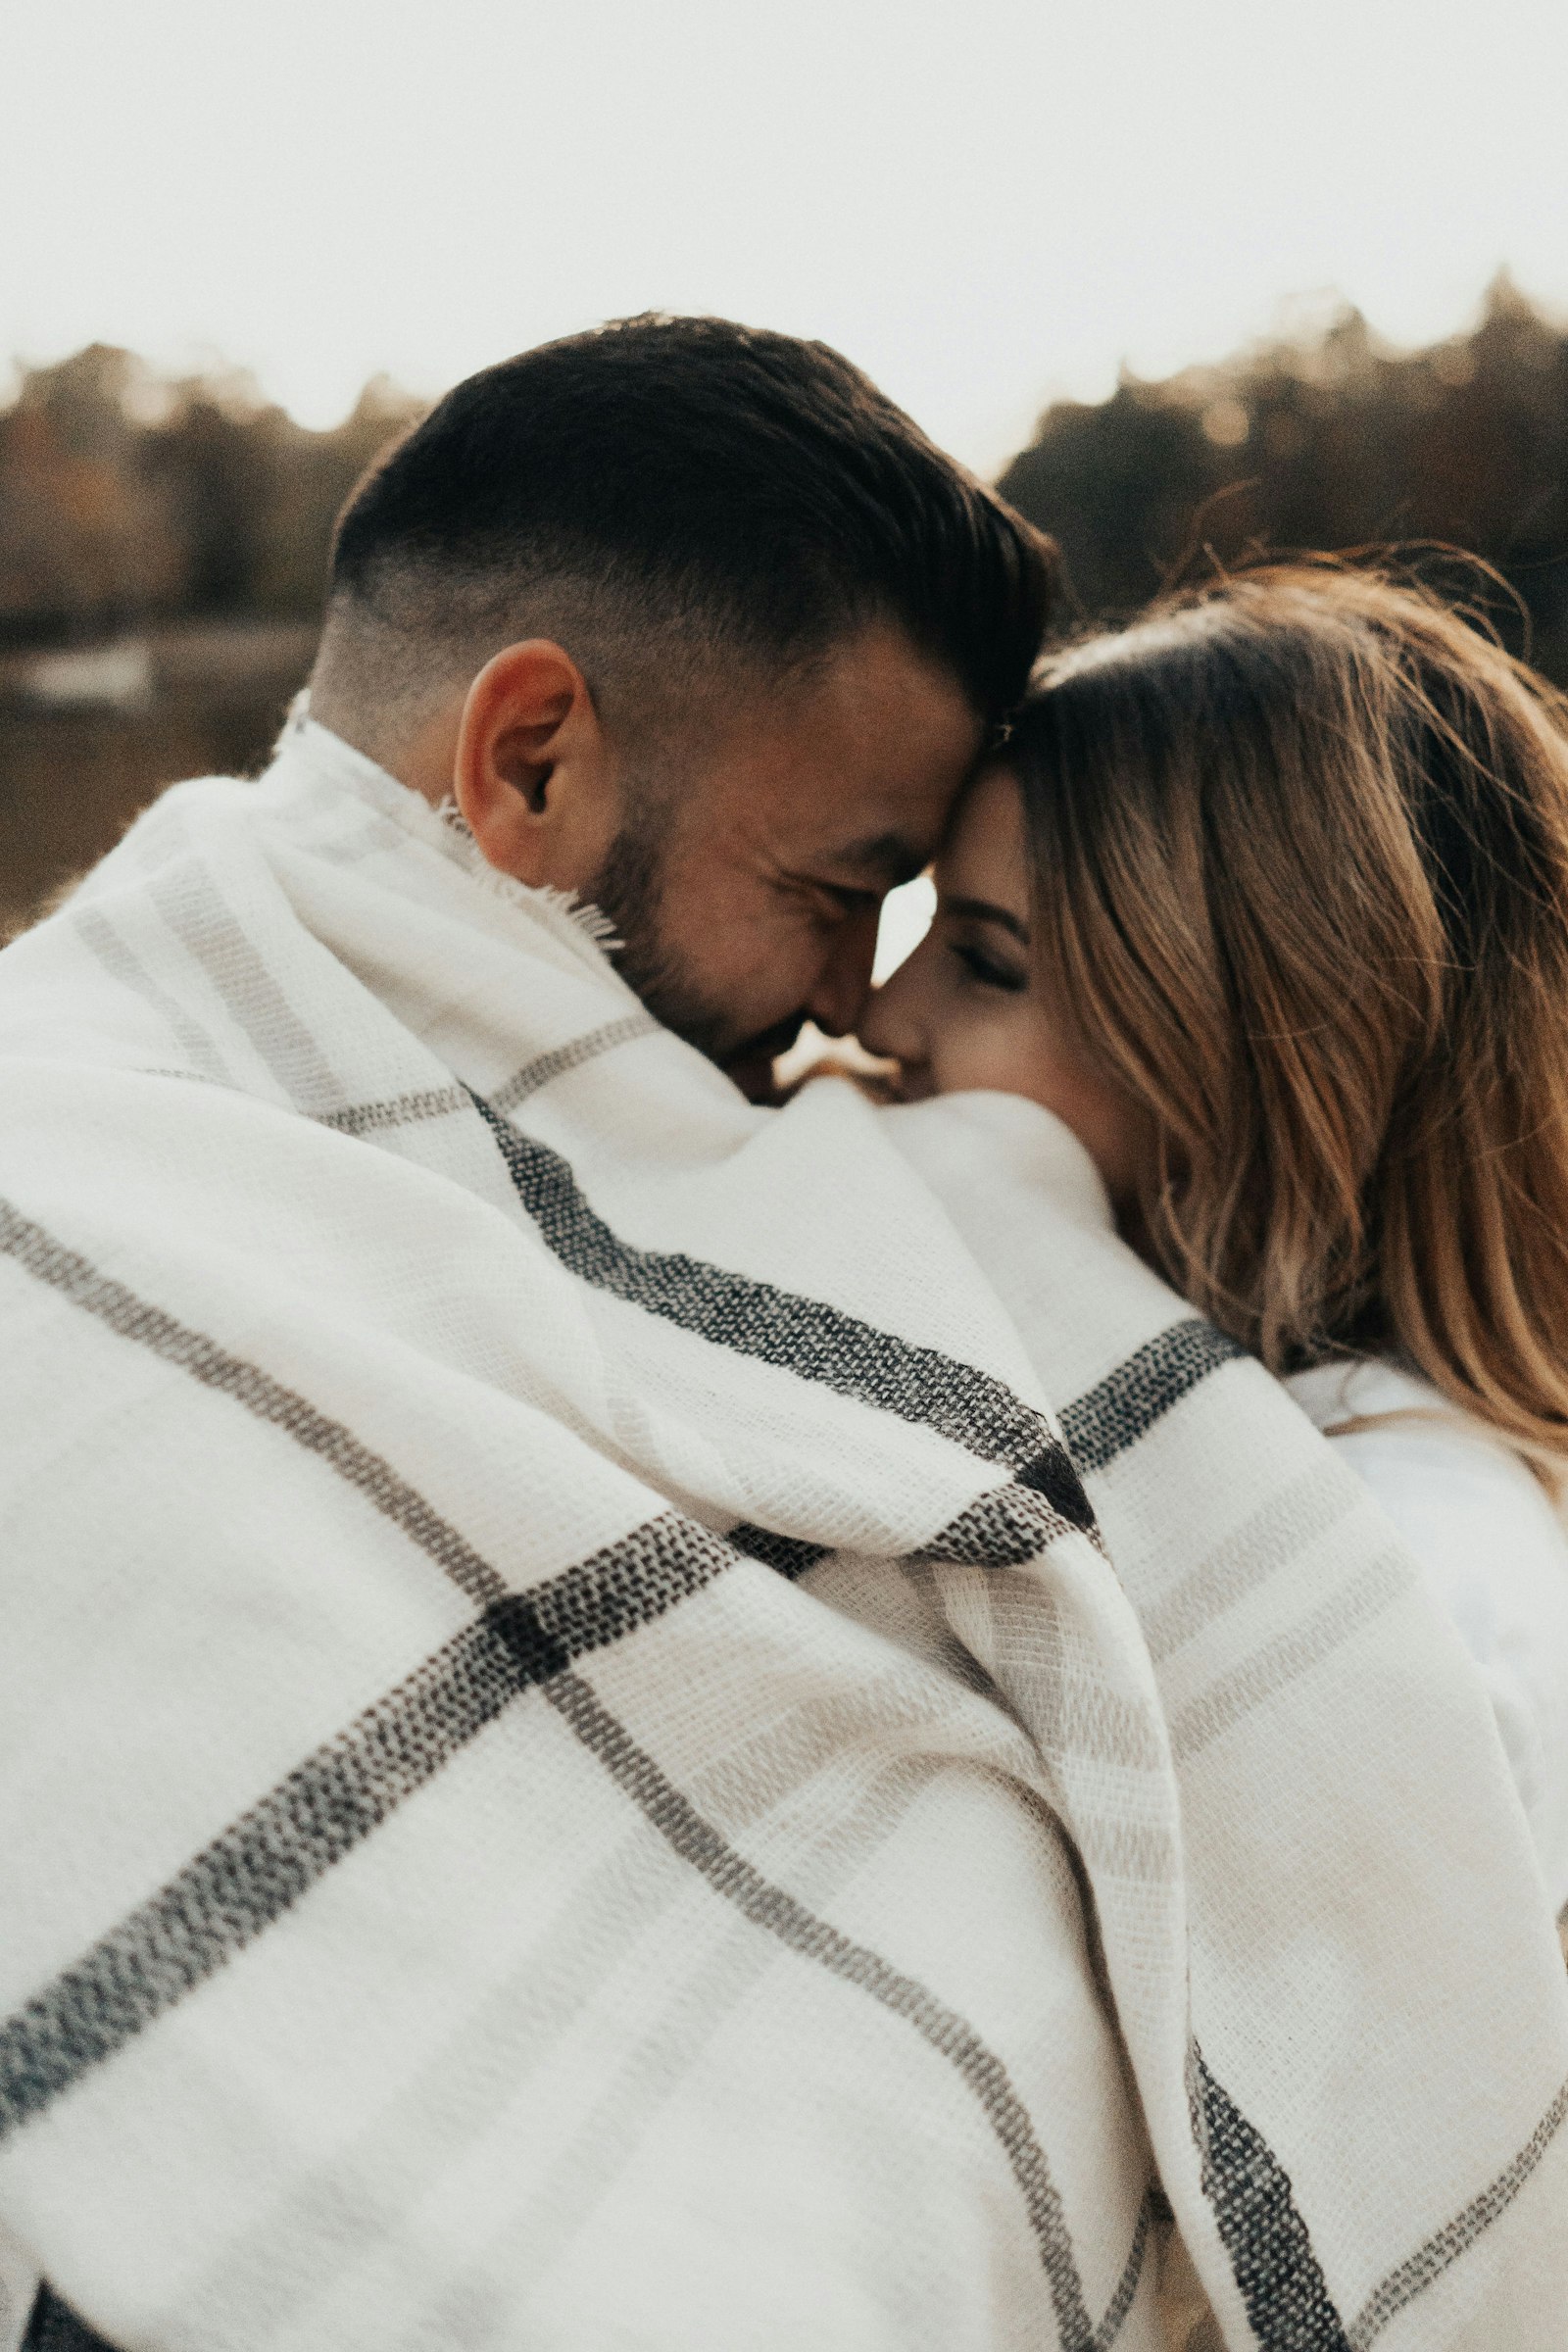 ZEISS Batis 25mm F2 sample photo. Couple on blanket photography